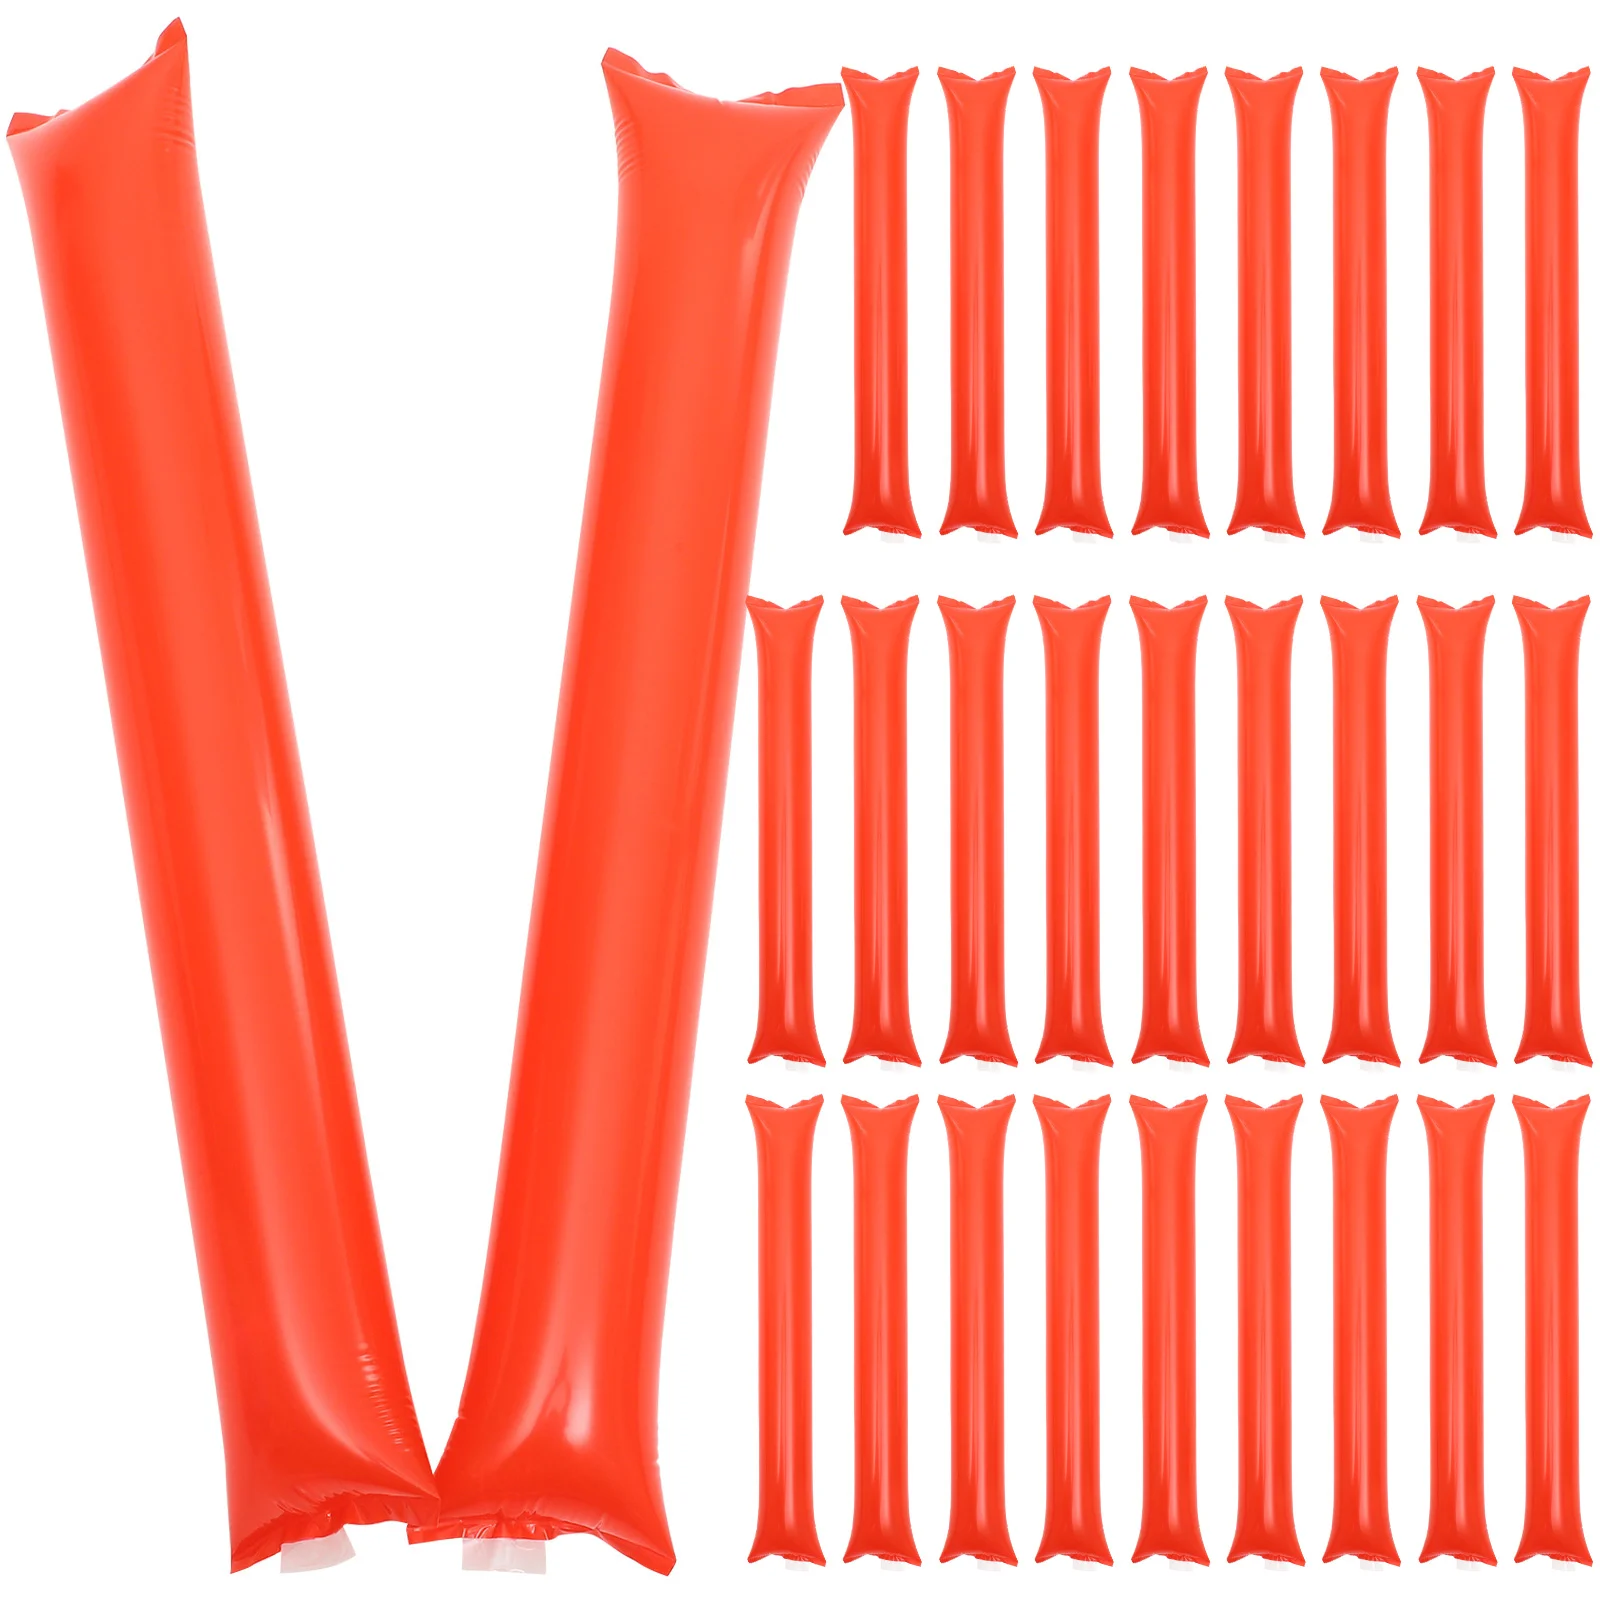 

40 Pcs Inflatable Stick Vermicelli Party Leaders Cheerleader Cheering Sticks Noise Maker Clappers Noisemakers